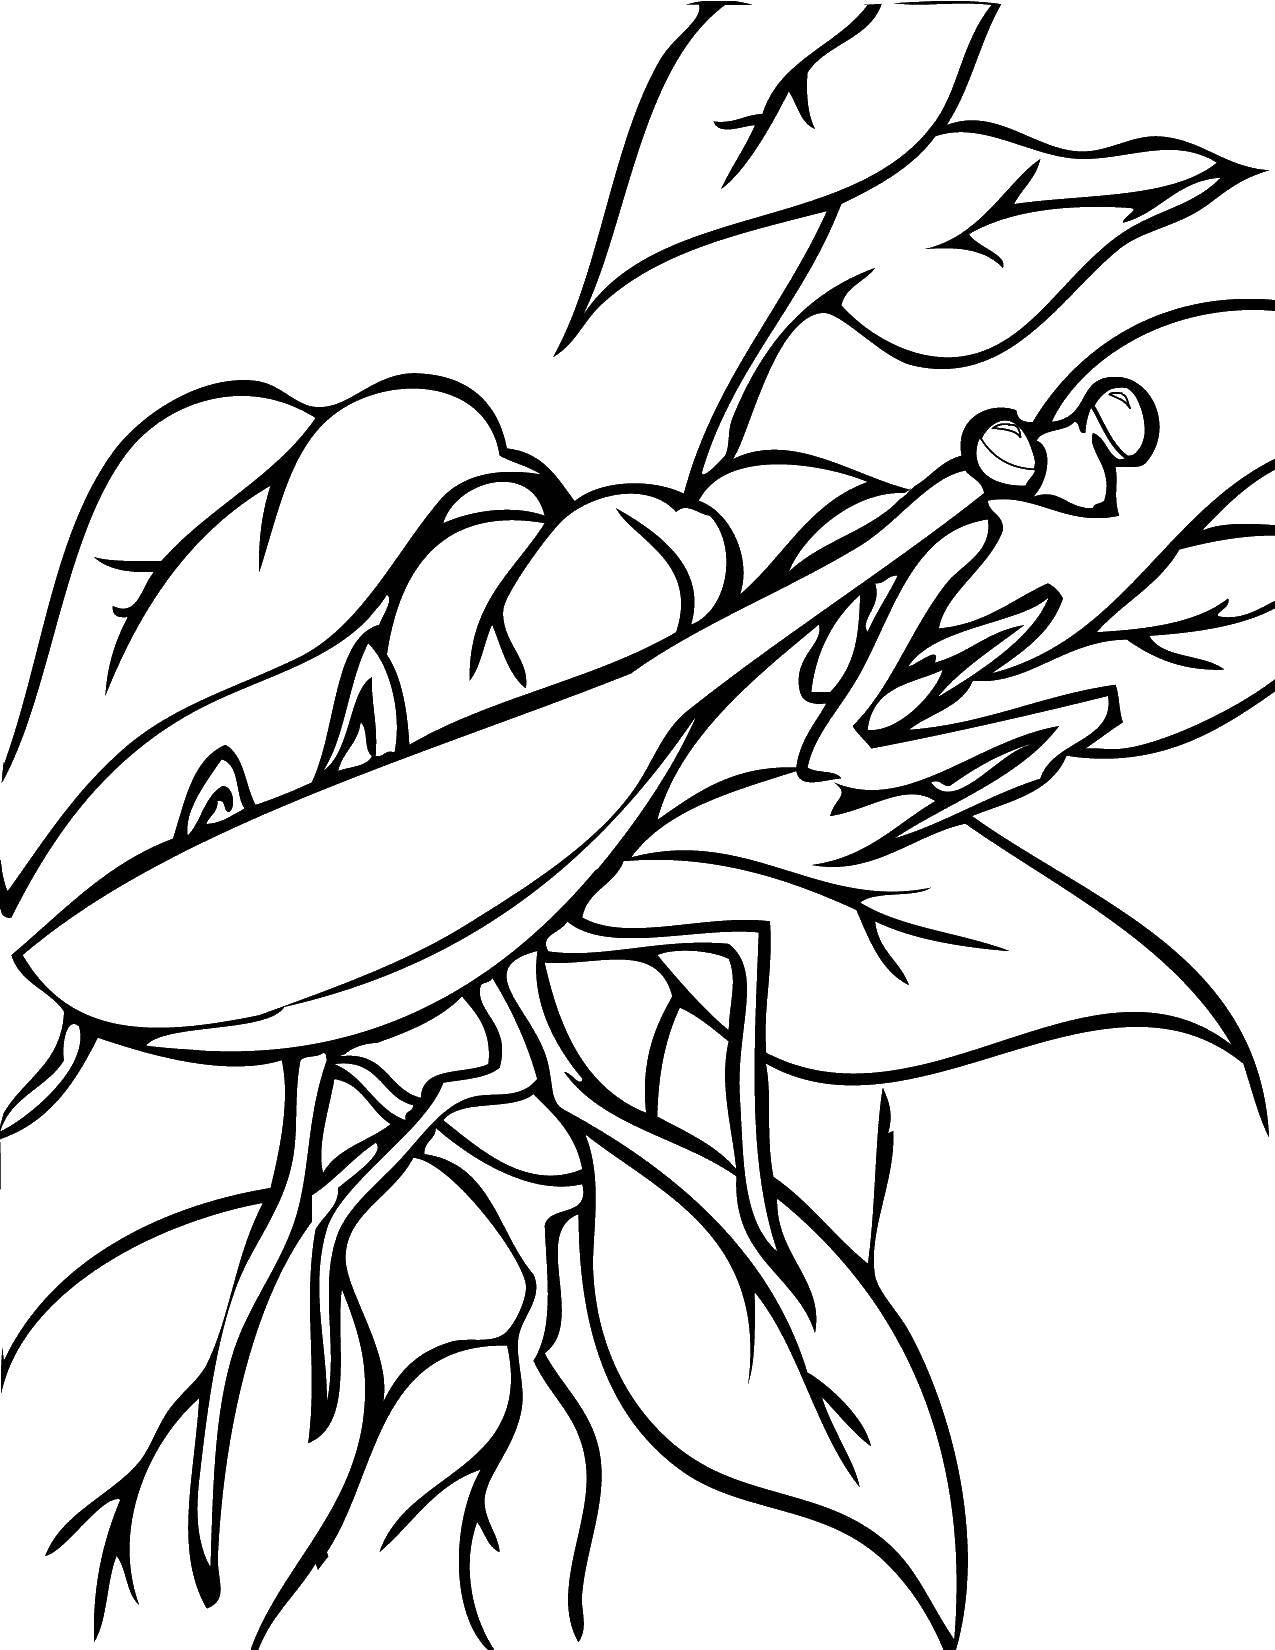 Coloring Mantis. Category Insects. Tags:  insects, mantis.